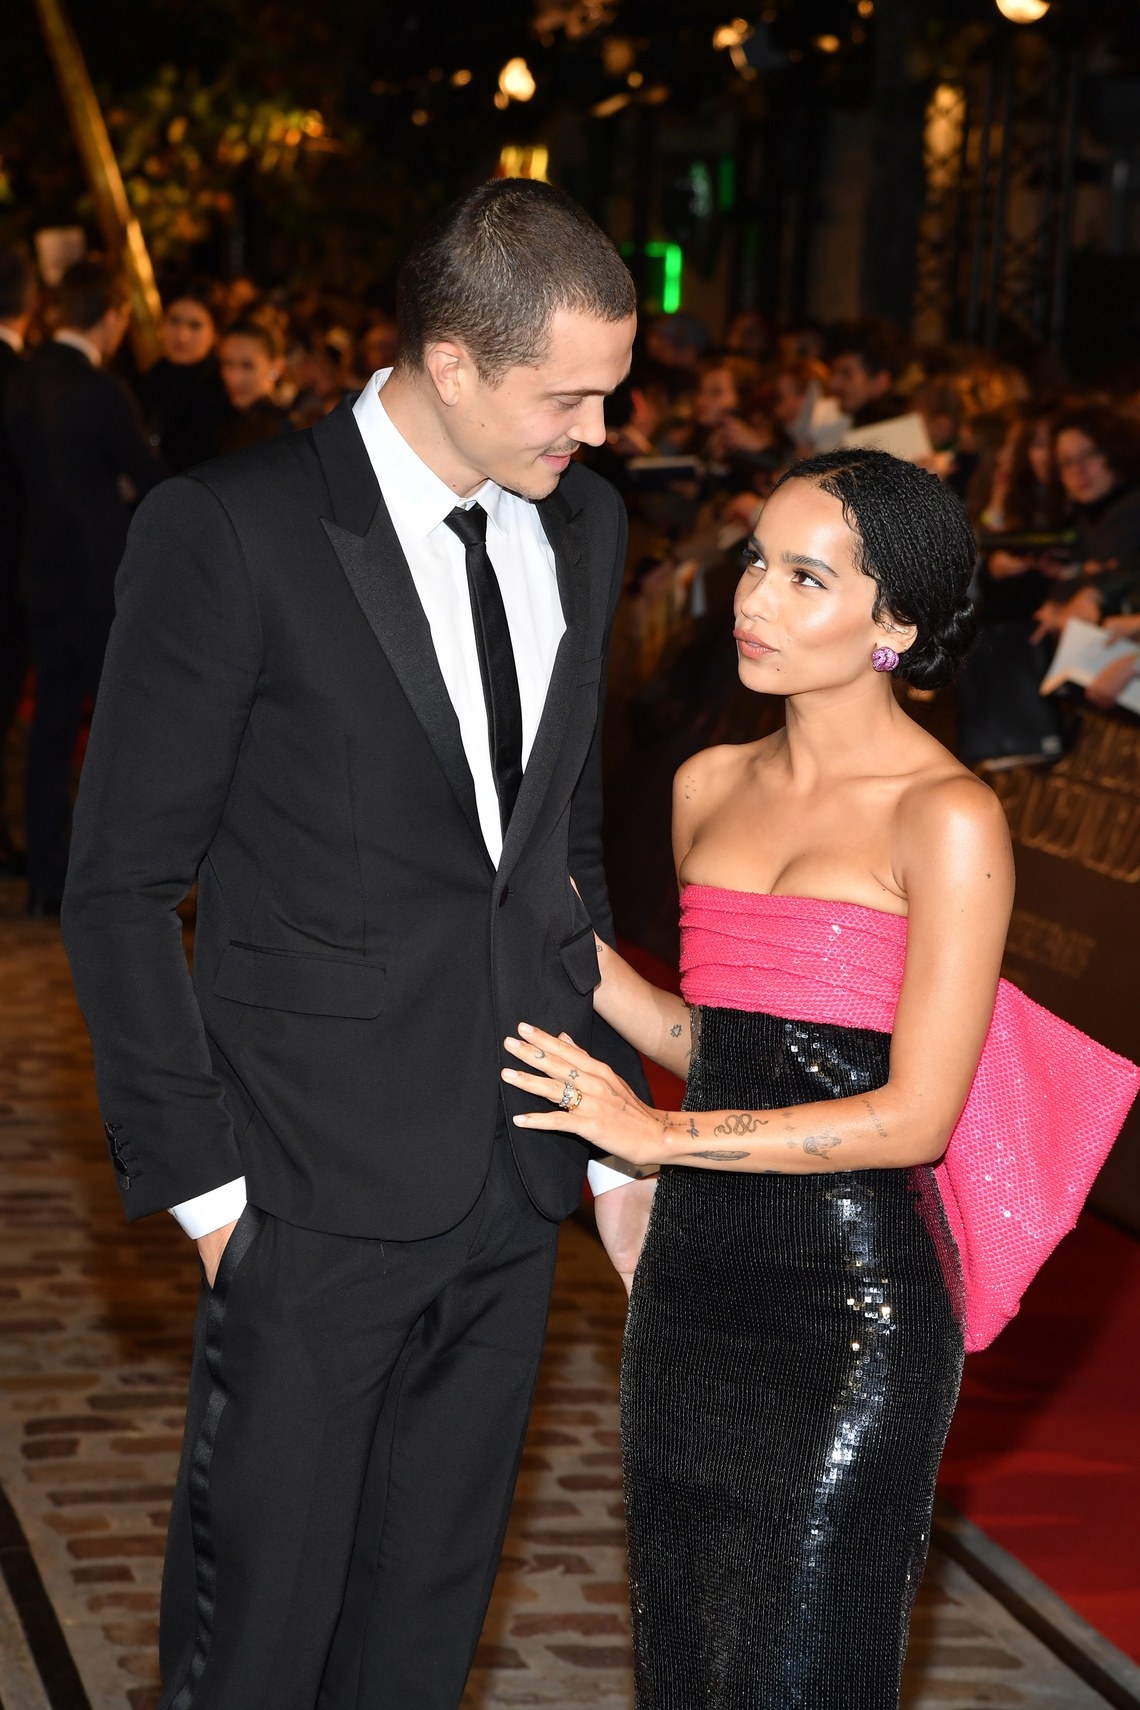 Zoë Kravitz Celebrates Her Engagement with a Touching Instagram